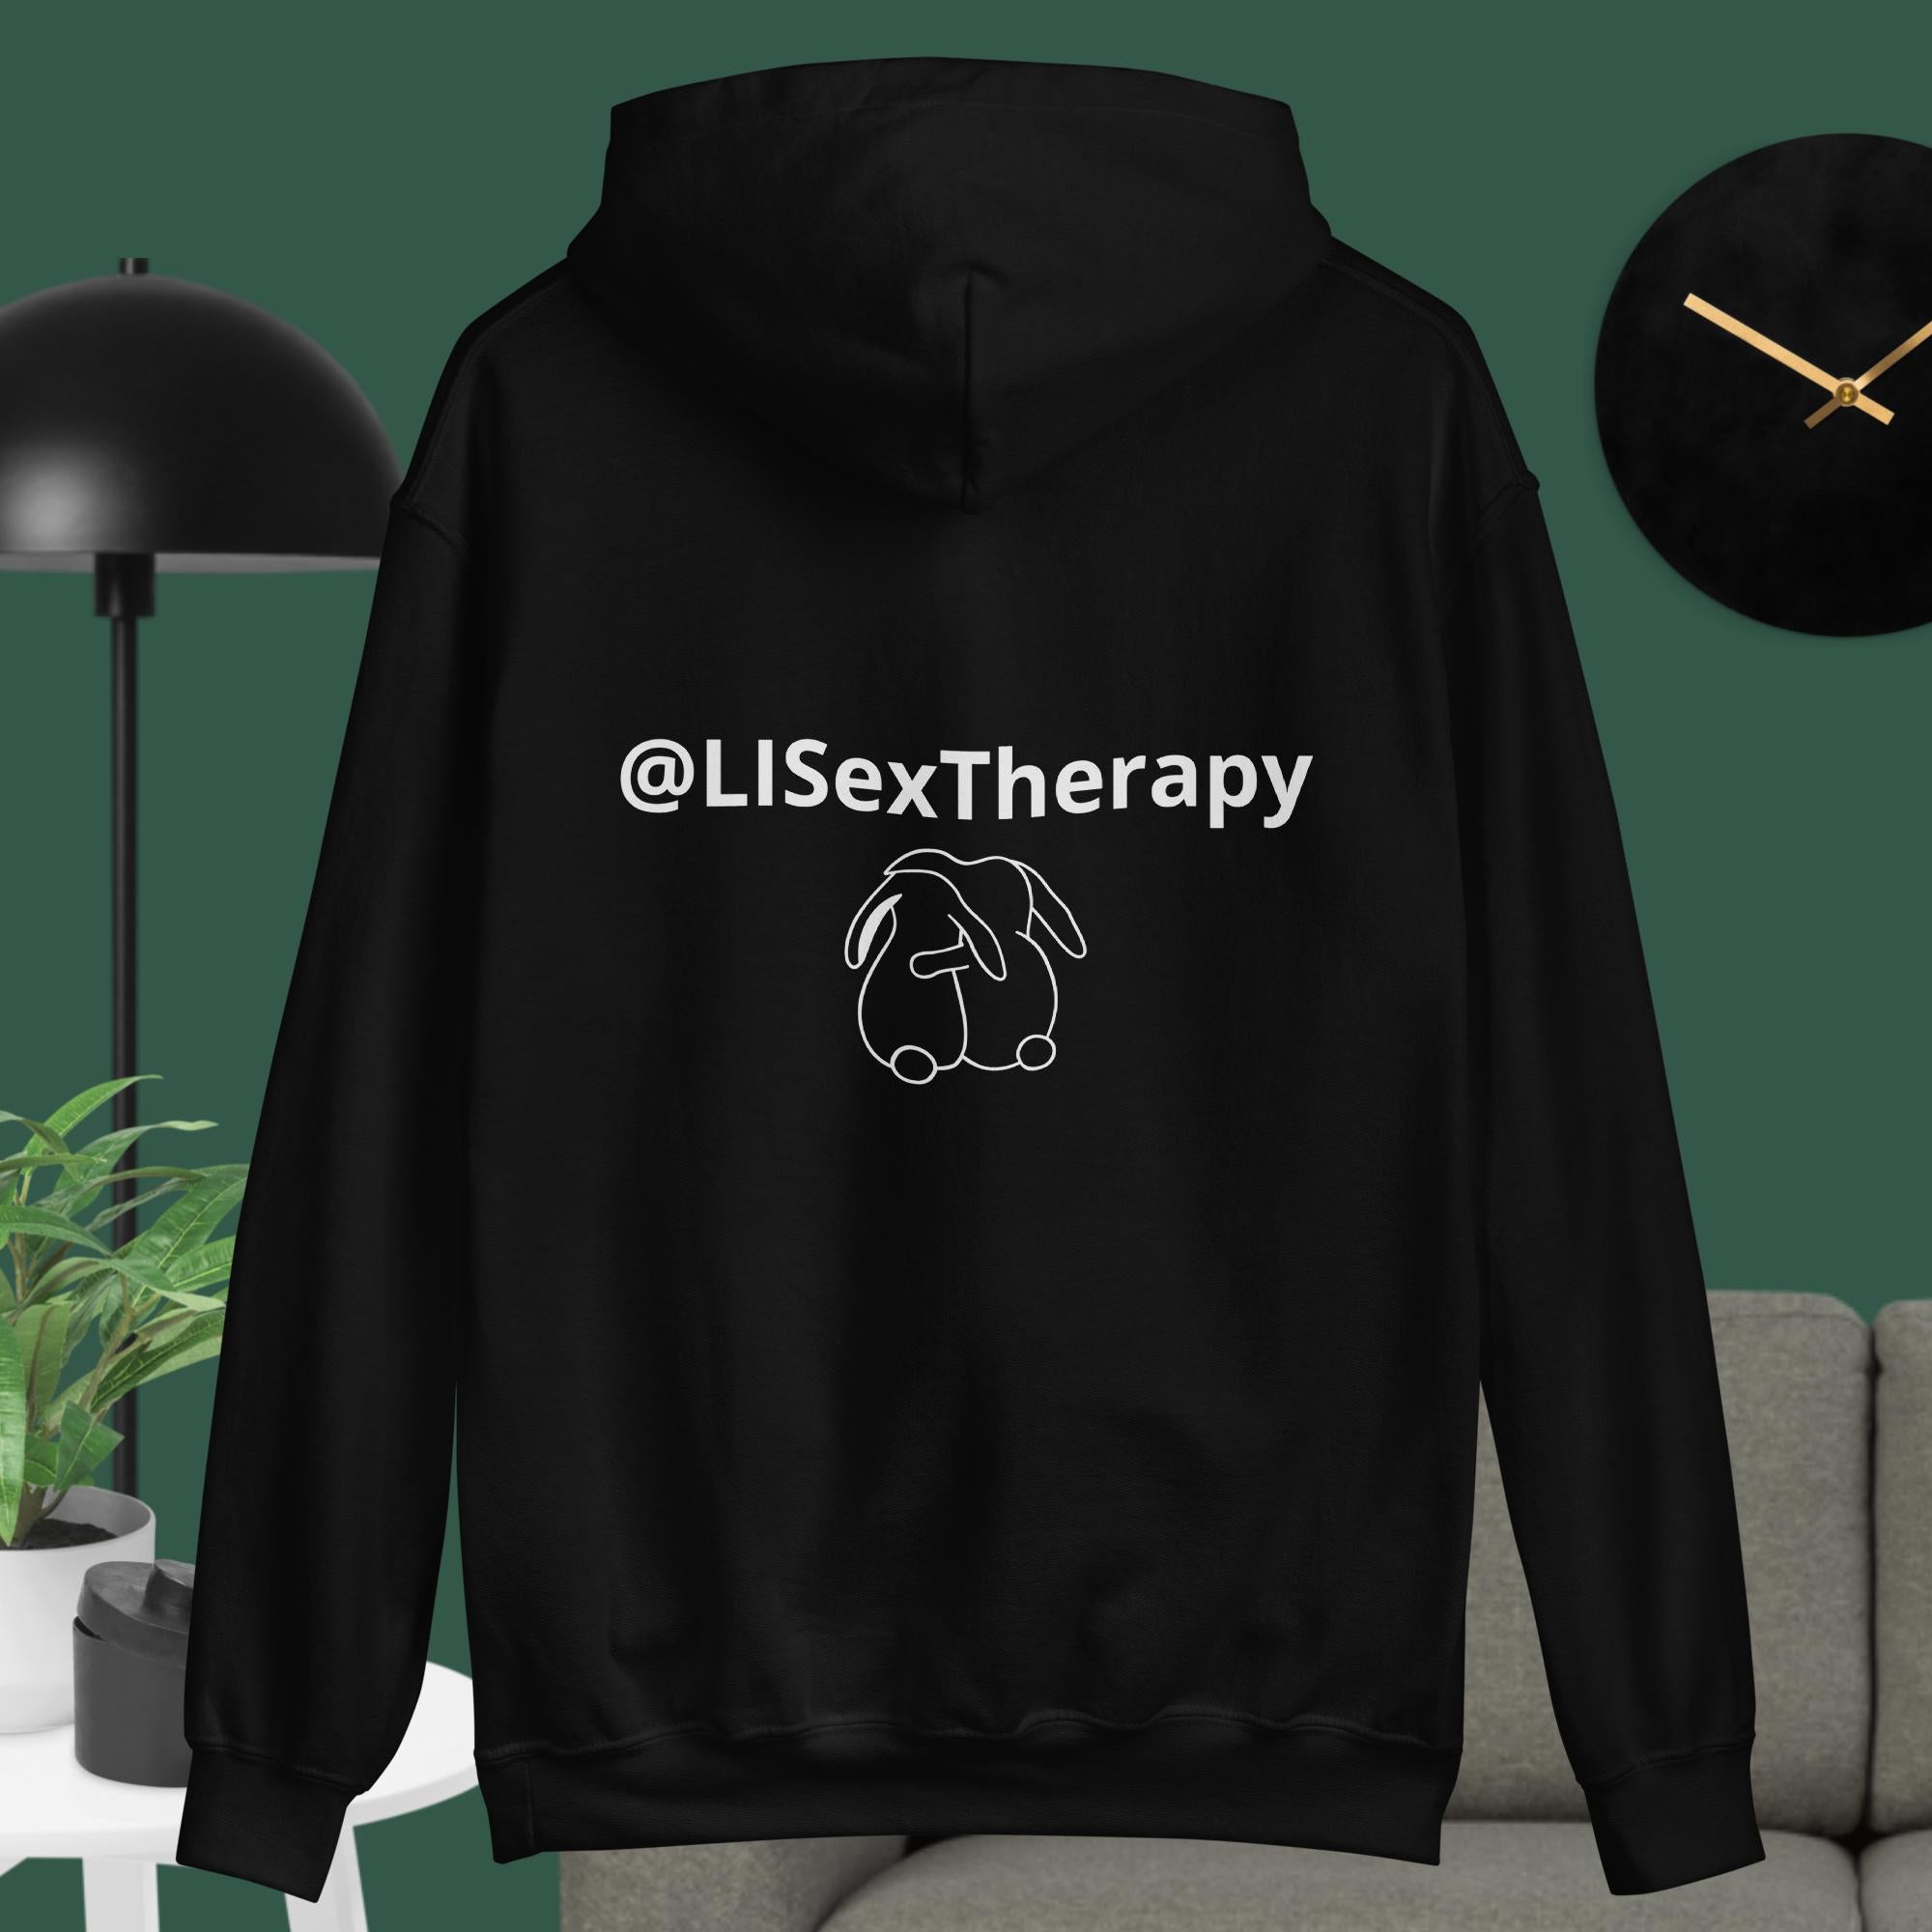 Hot People Go To Therapy Hoodie